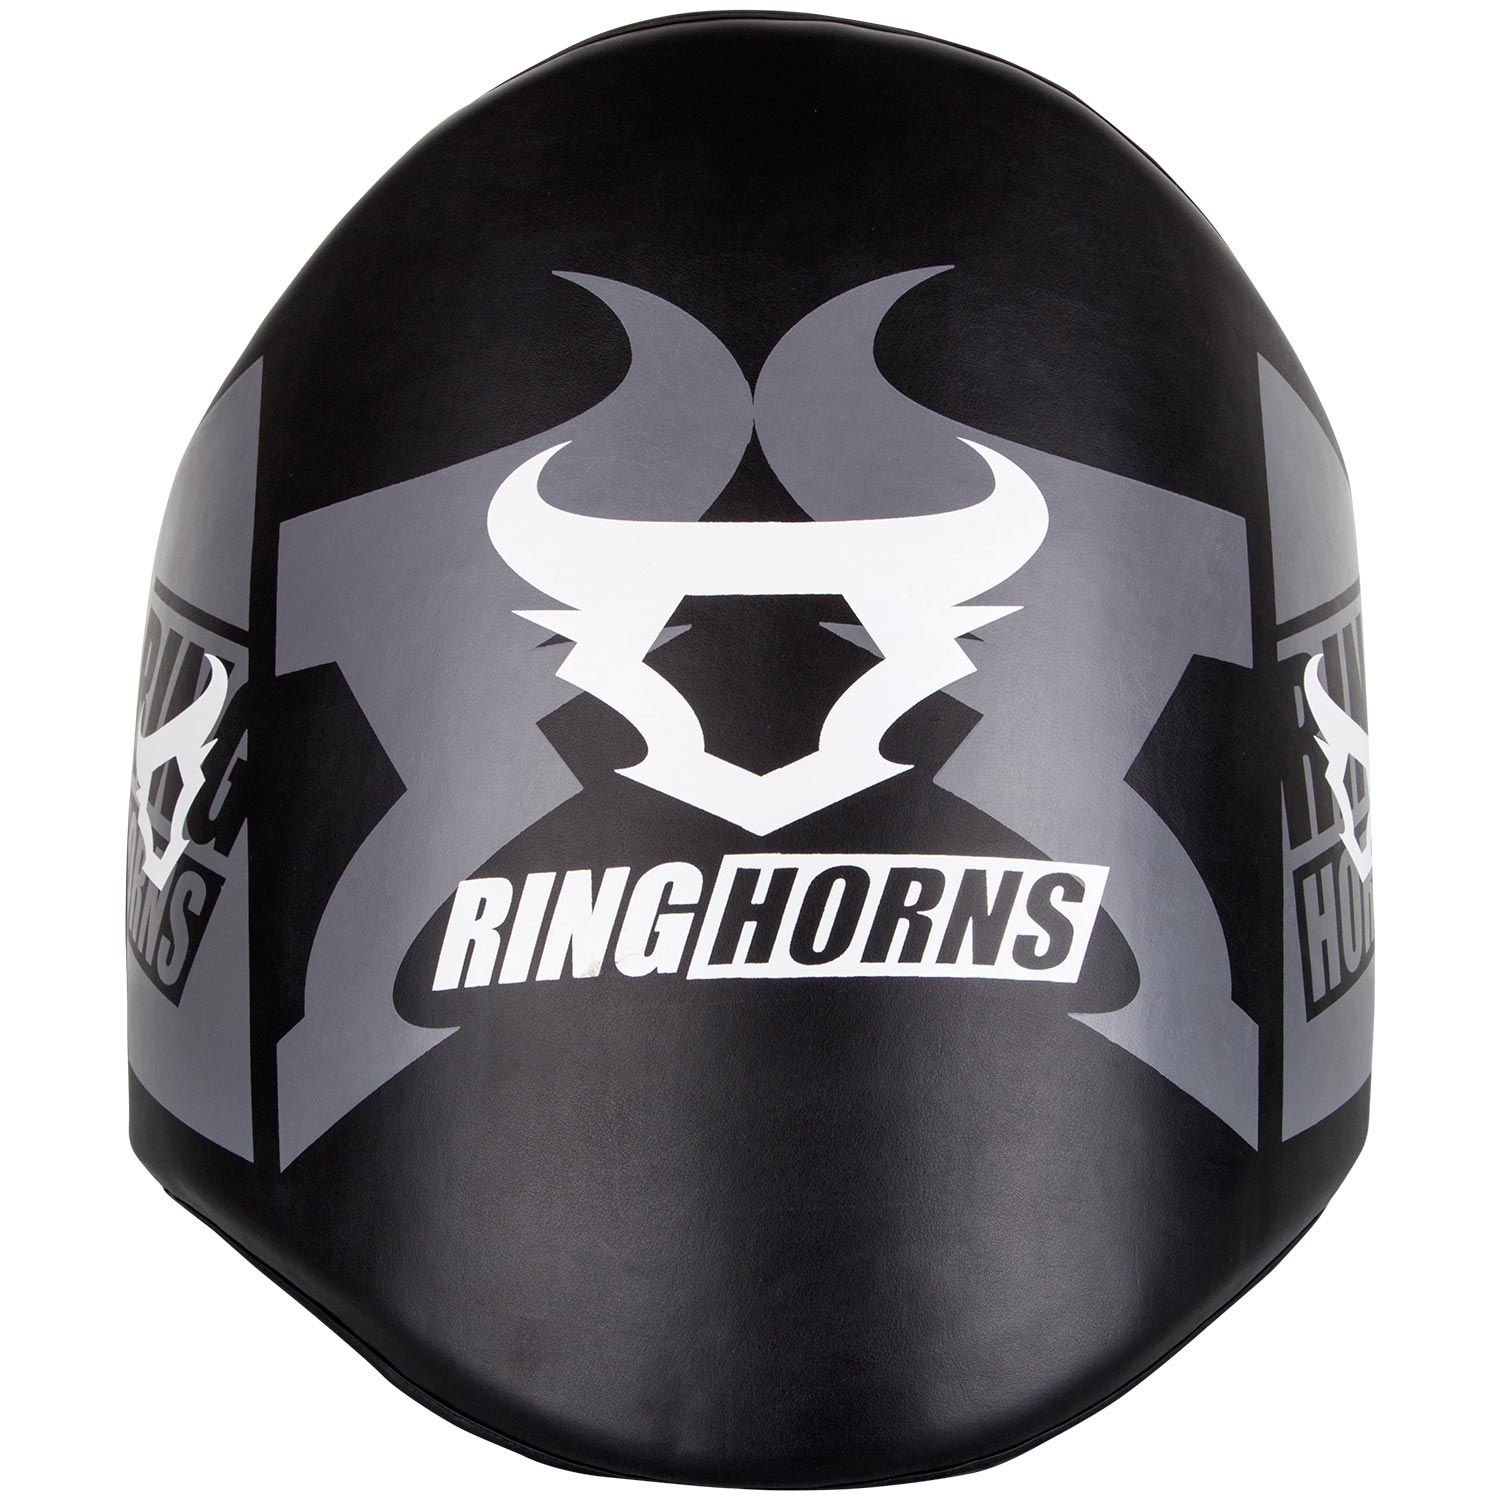 Ringhorns Charger Belly Protector - Black